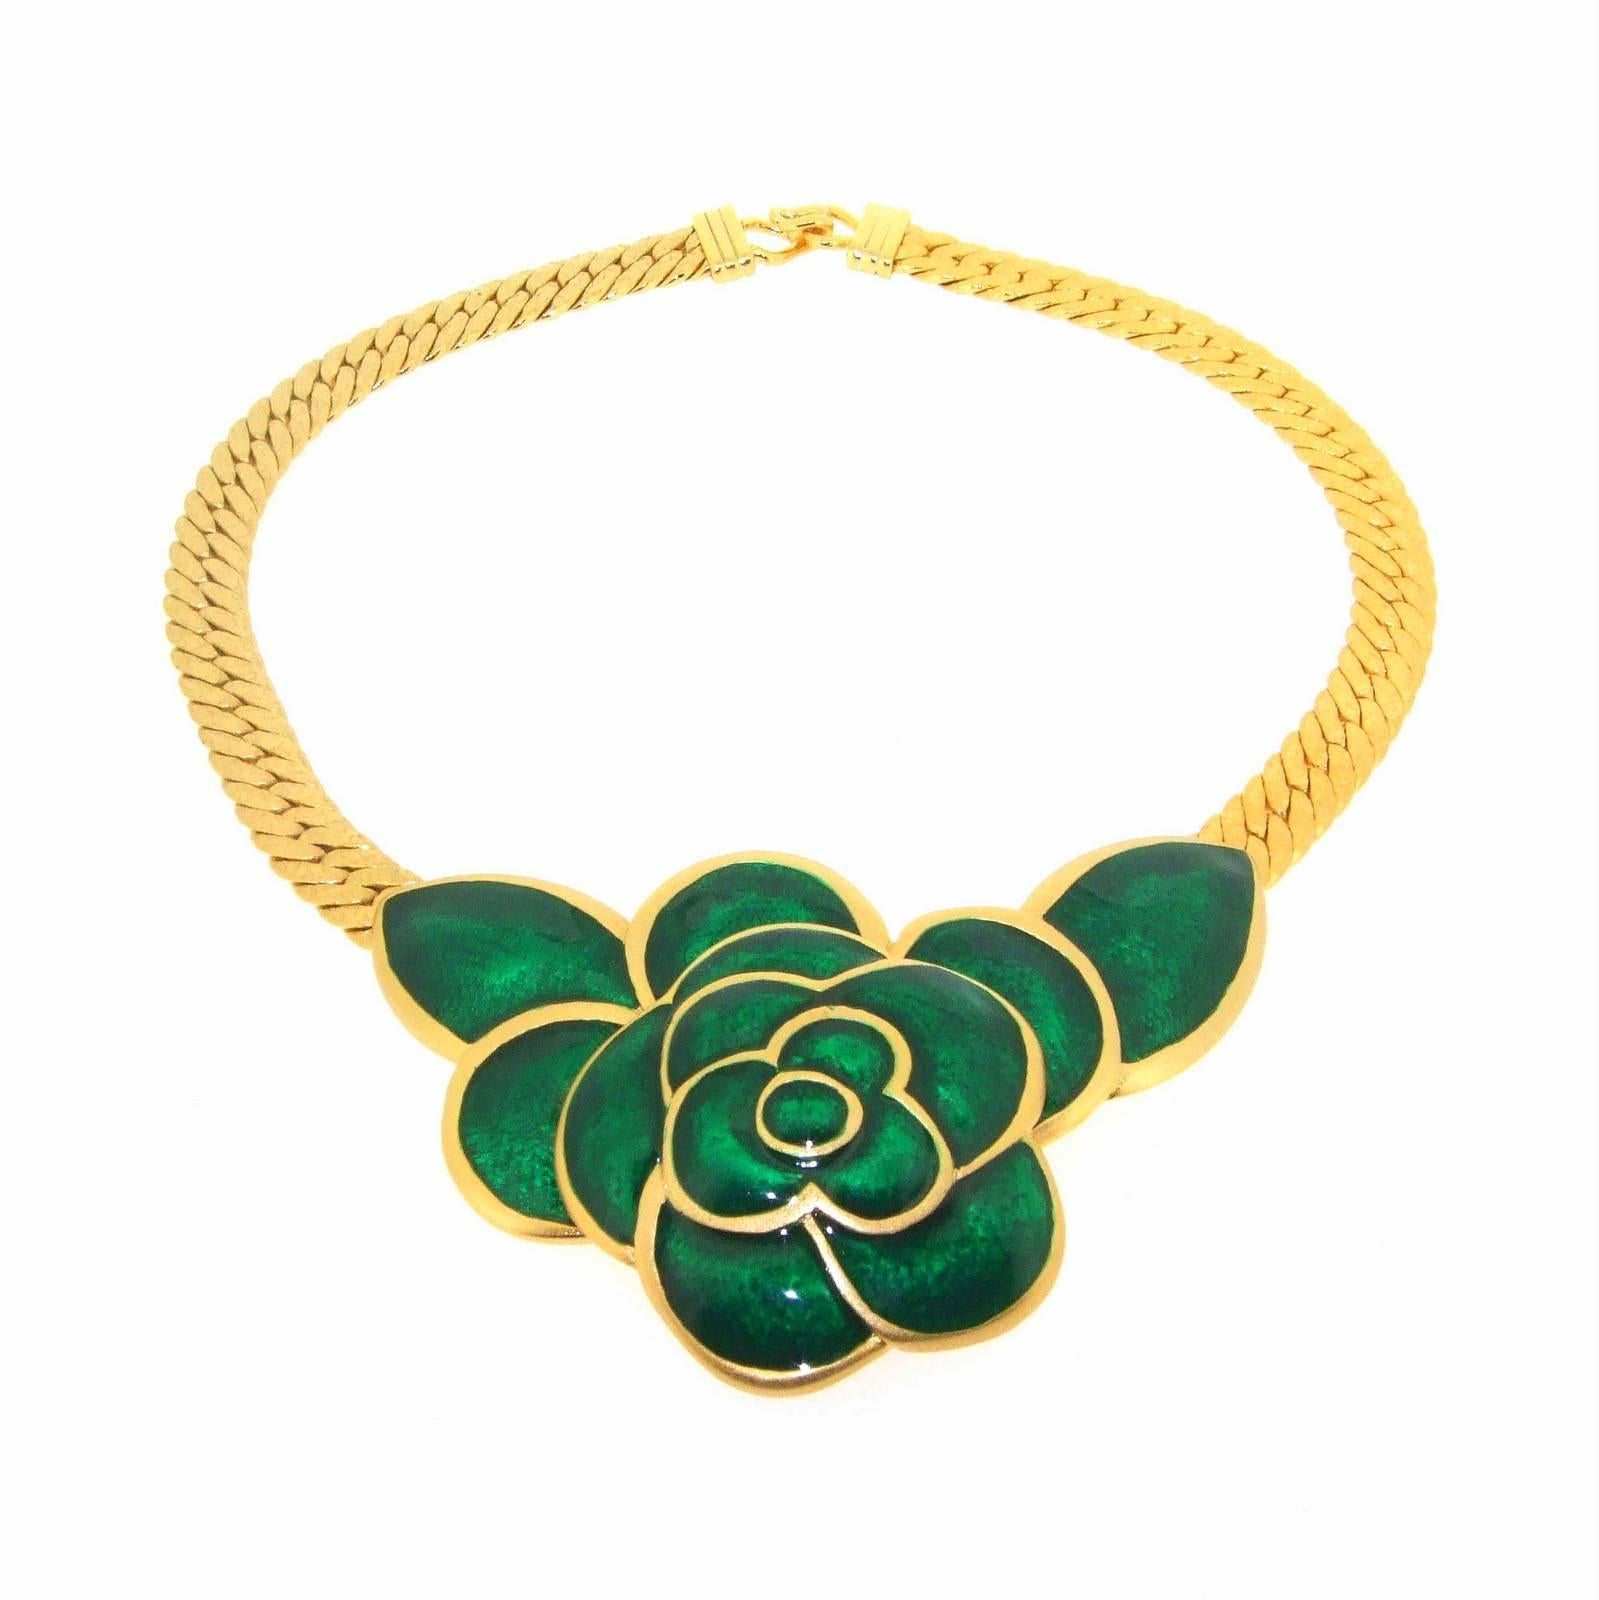 A beautiful necklace by Balenciaga with a central green enamel flower. 

The enamel section measures 3 1/2 inches(8.7cm) across. We also have the matching clip on earrings for sale in a separate listing.